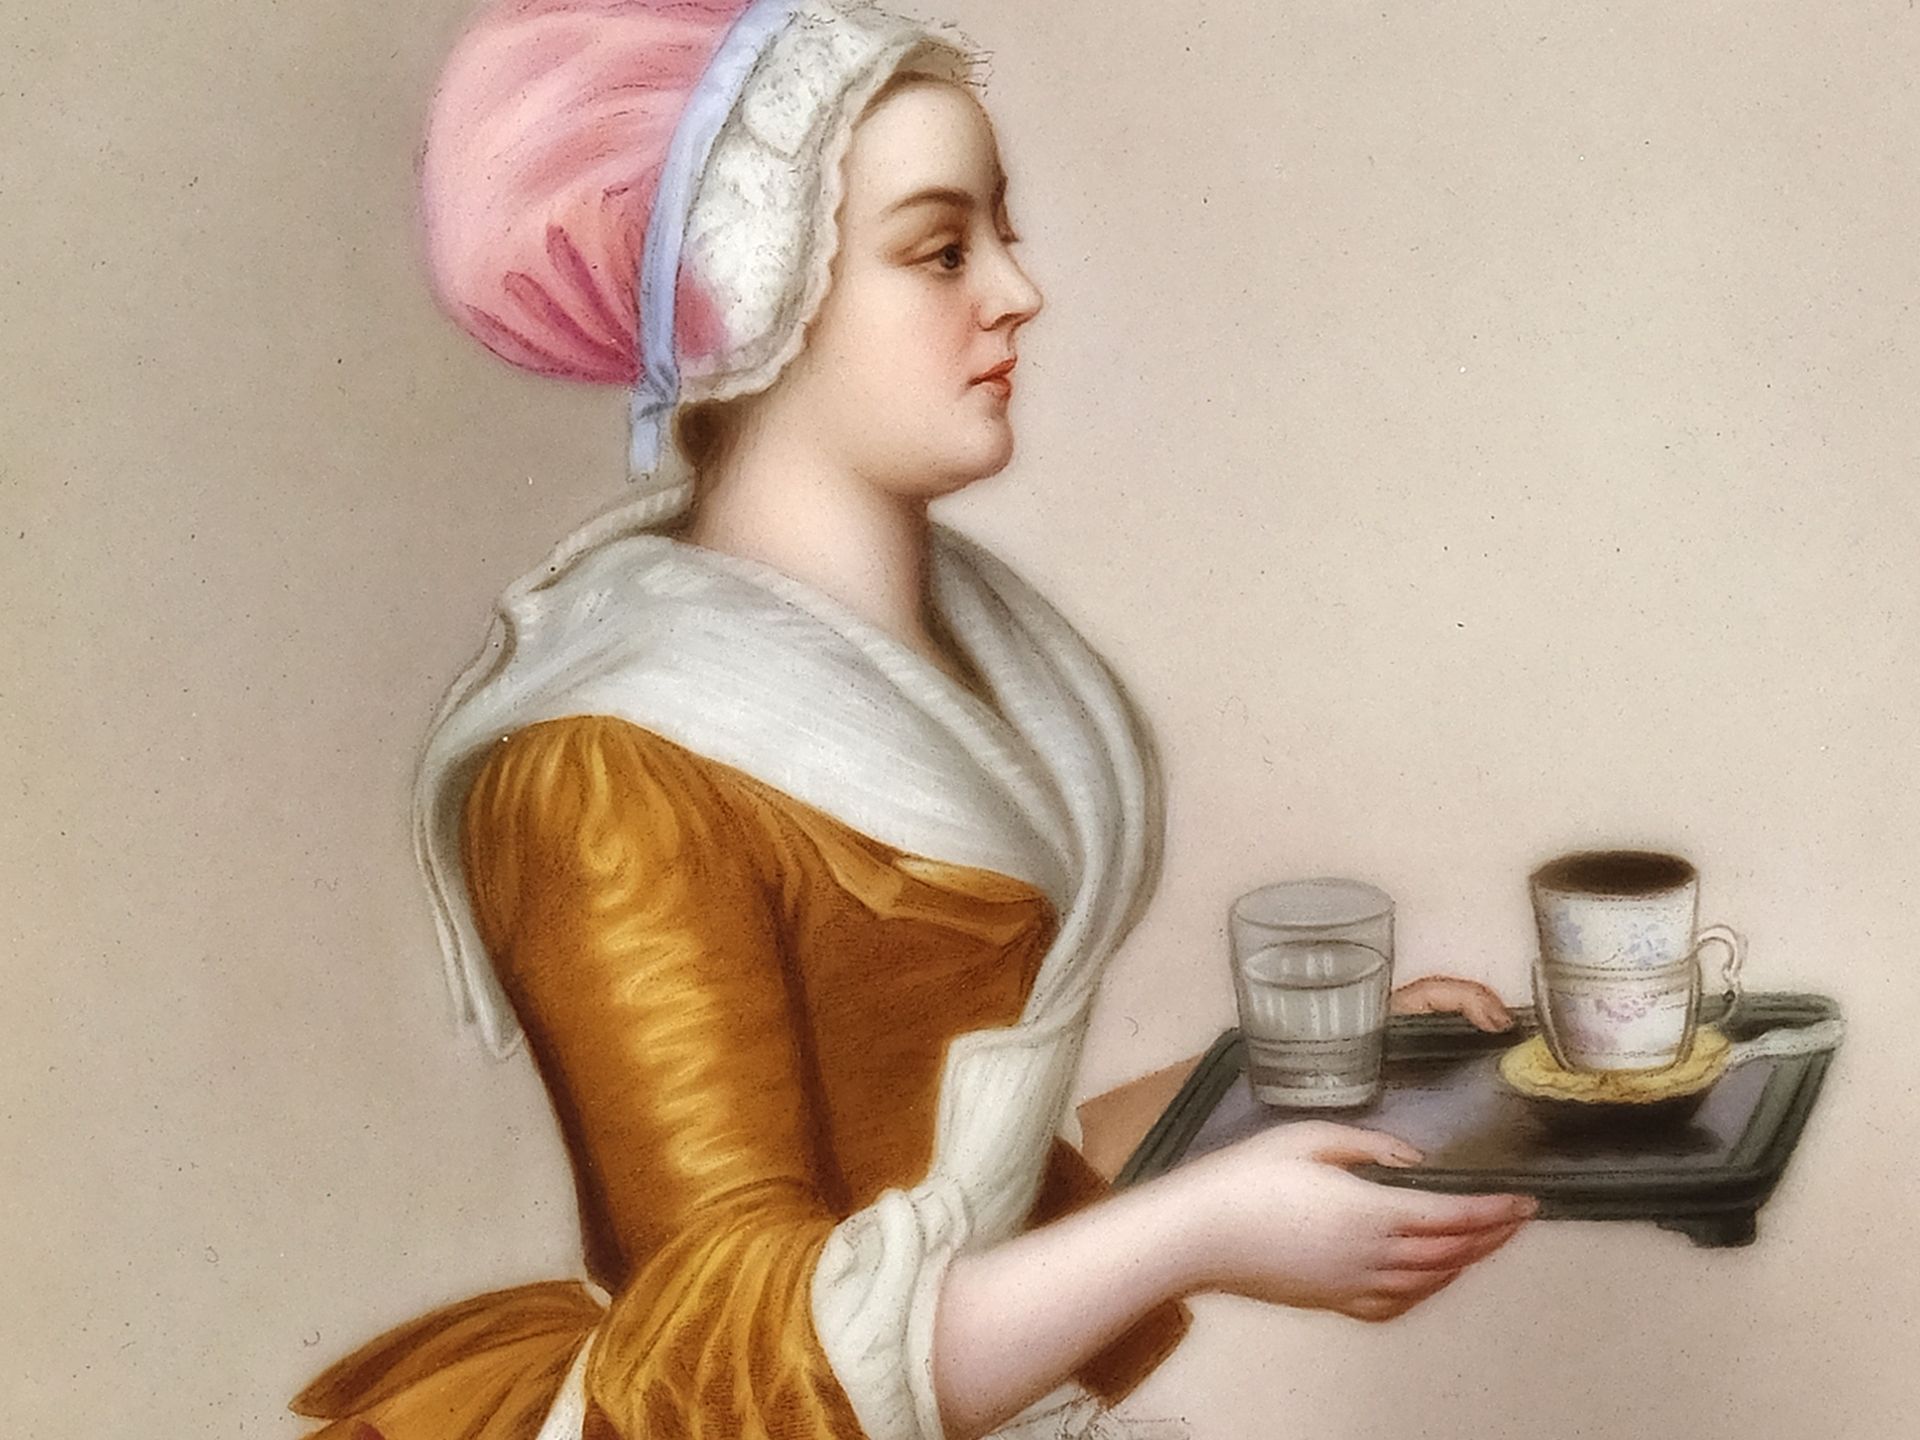 Jean-Étienne Liotard, Geneva 1702 - 1789 Geneva, follower, The Girl with the Chocolate Cup - Image 3 of 4